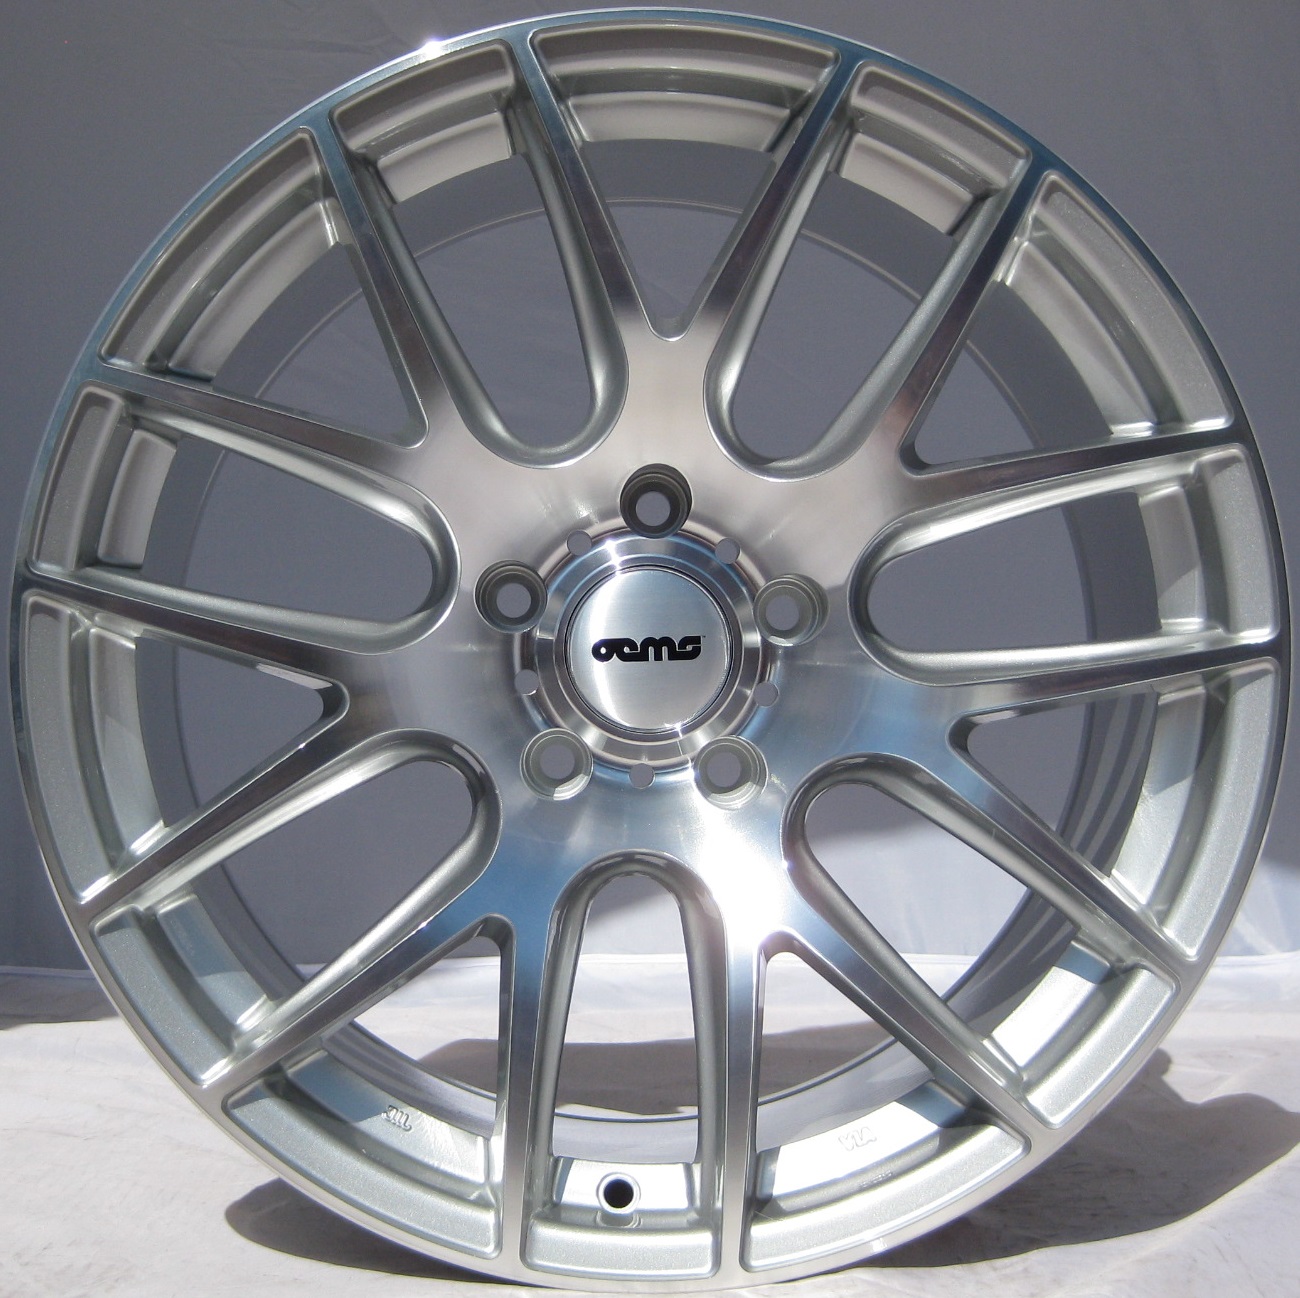 NEW 20  OEMS 111 ALLOY WHEELS IN SILVER WITH POLISHED FACE AND BIG CONCAVE 10  ALL ROUND